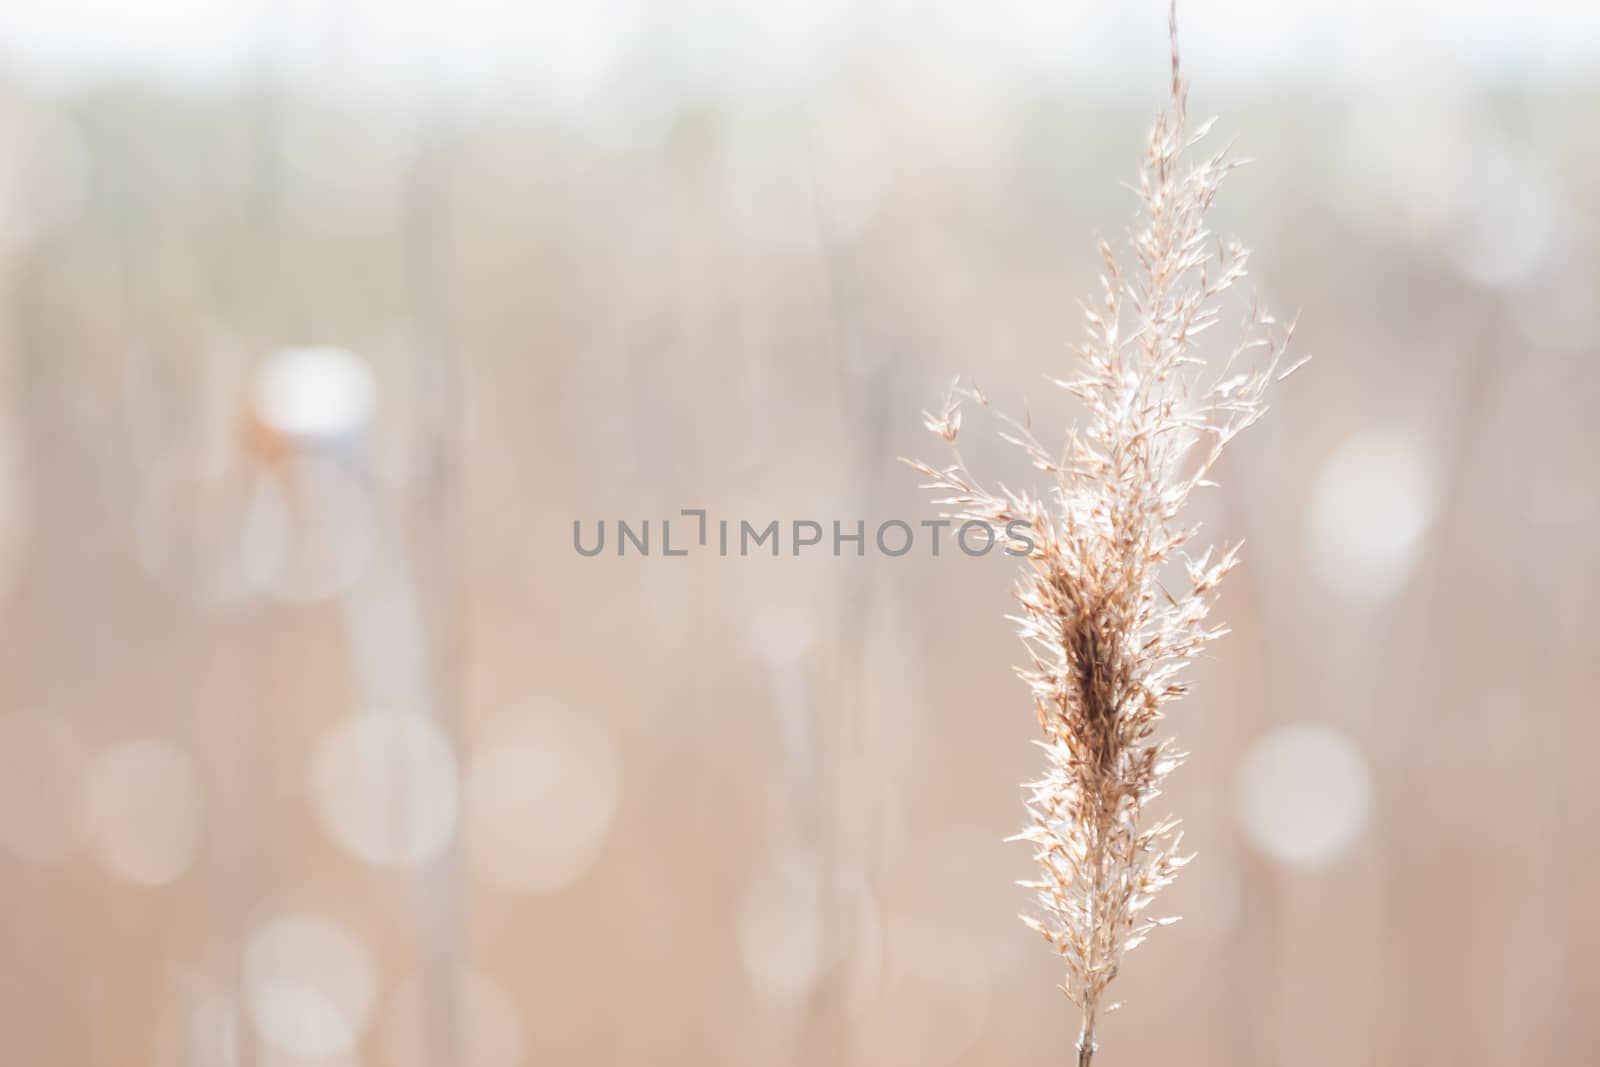 many blurred spikelets can be used as background